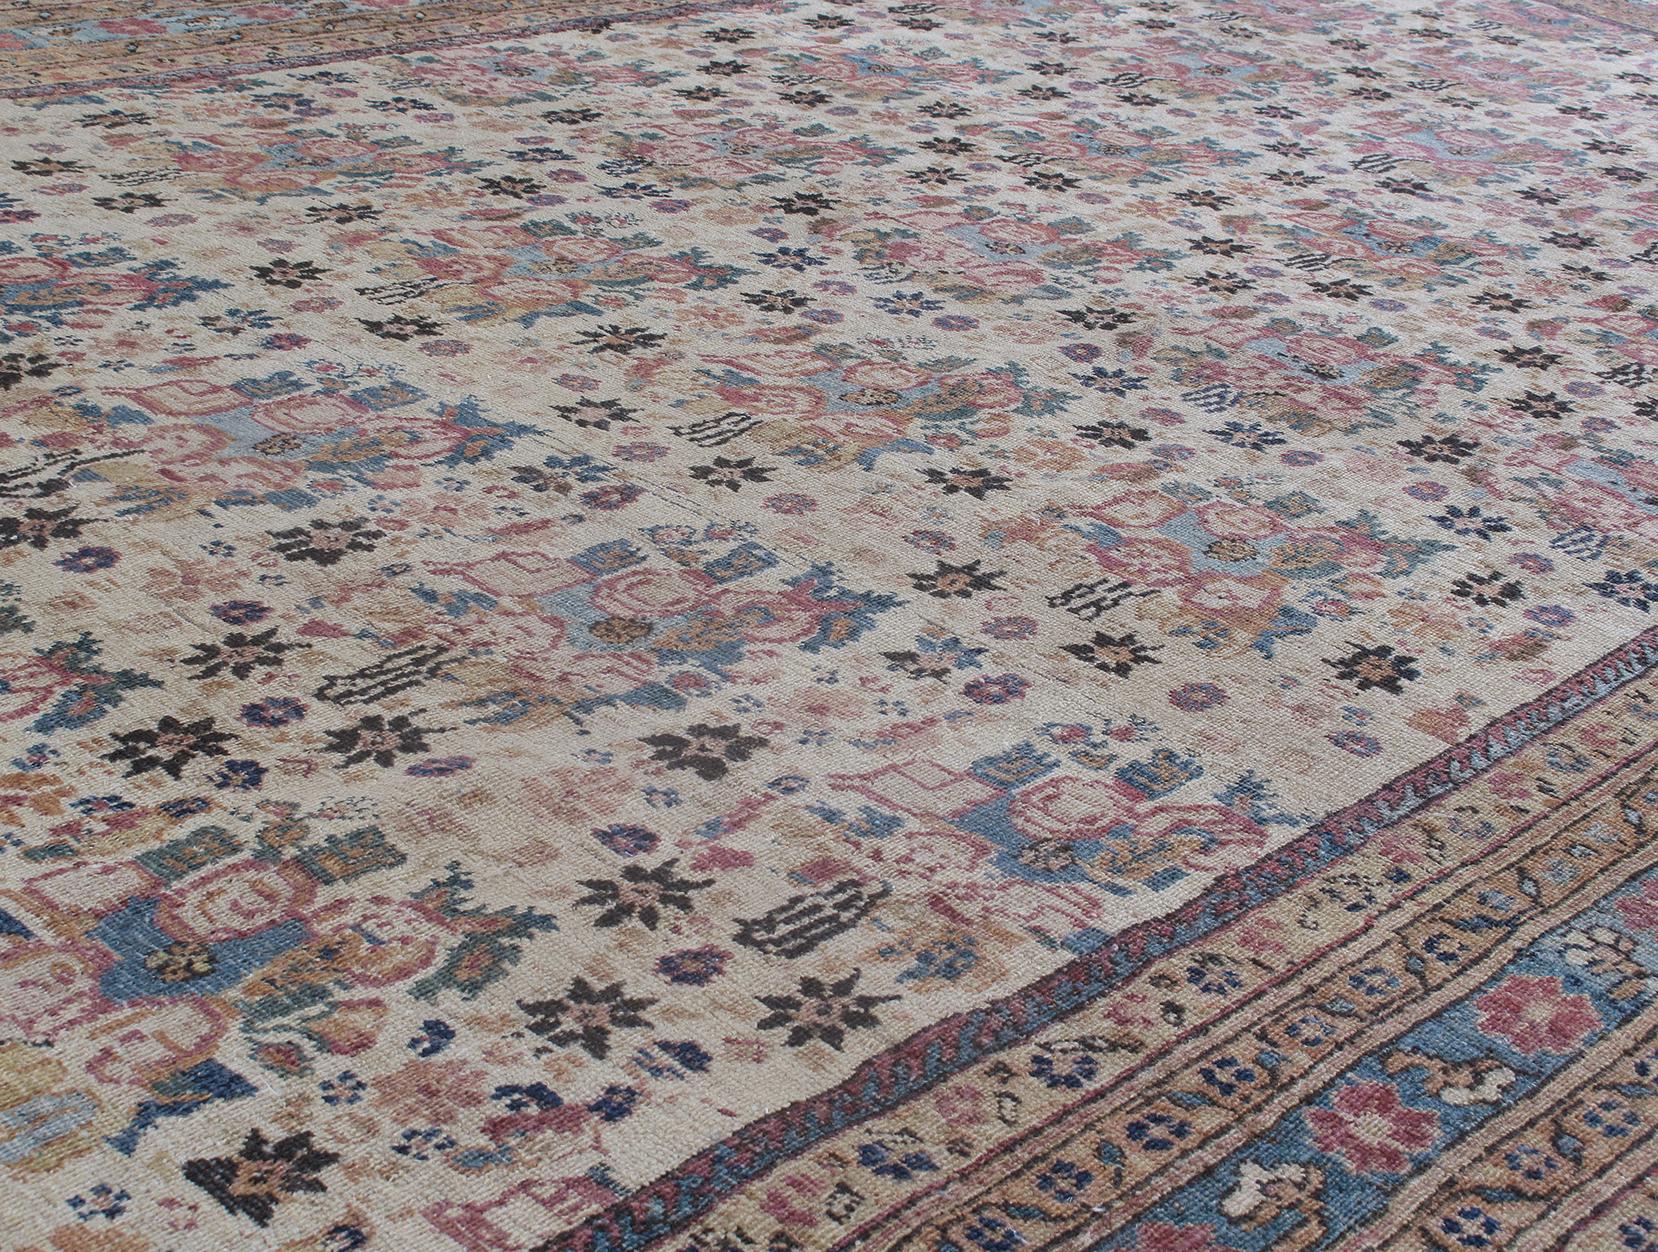 This antique Kerman rug is skillfully sourced by N A S I R I through extensive travel, passion, and research. Kerman rugs are named after a major rug weaving village in central south-eastern Iran. The village was known for producing extremely fine